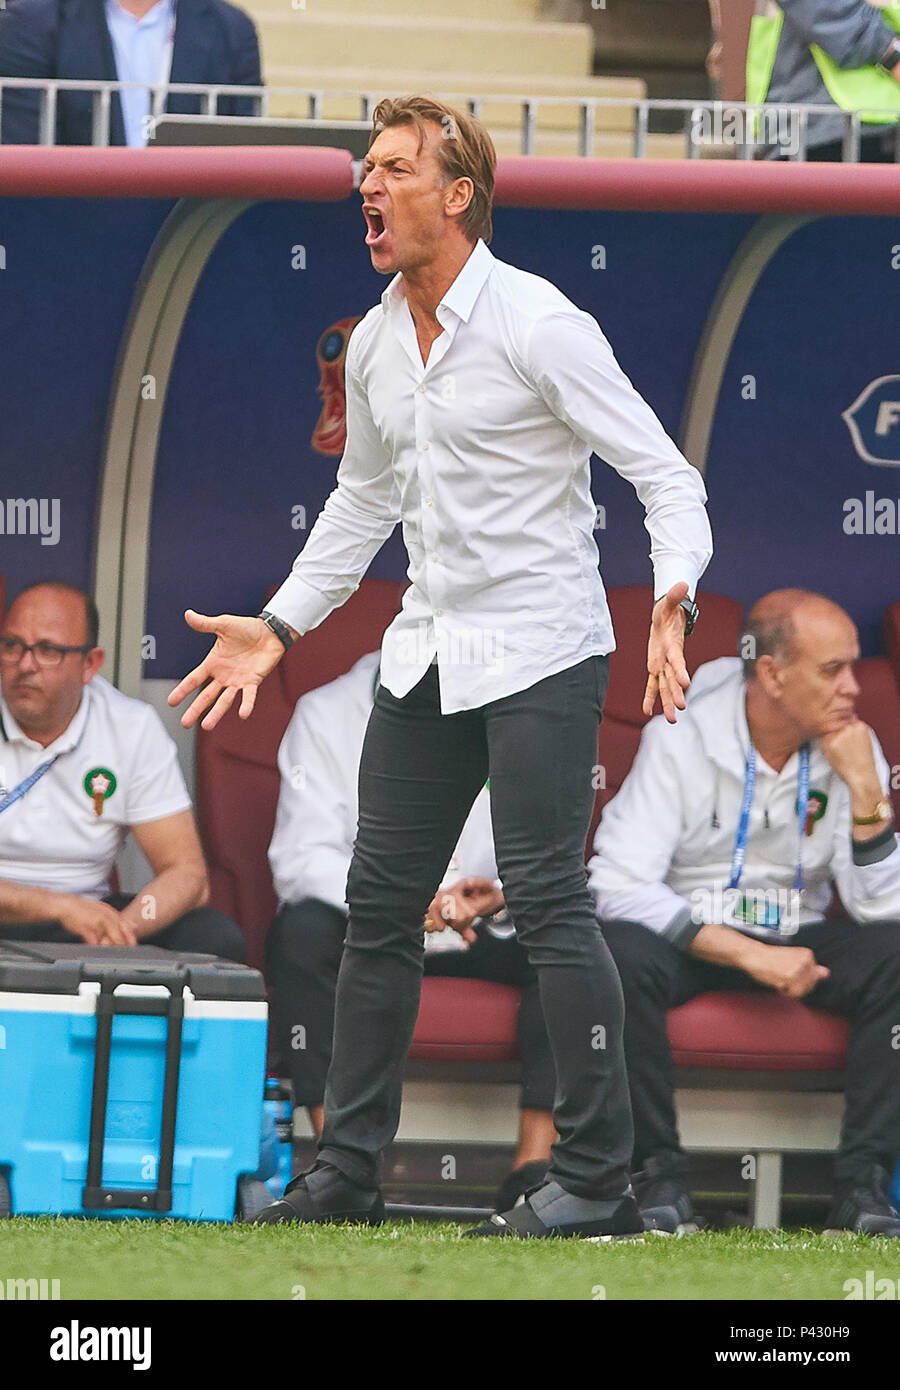 Herve Renard - African Football's Very Own Style Icon